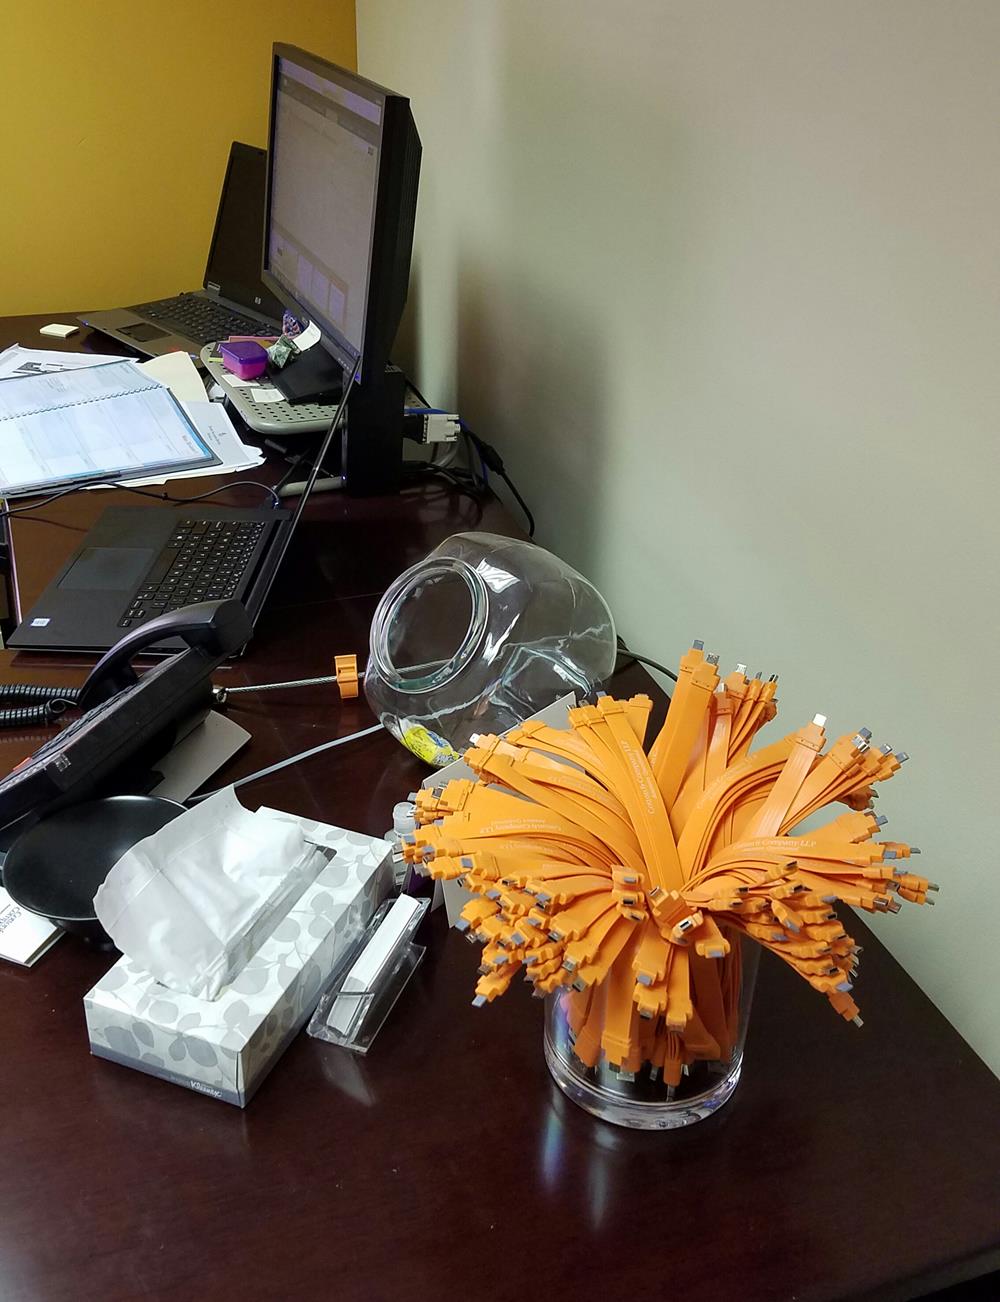 a bunch of orange cables in a glass on a desk